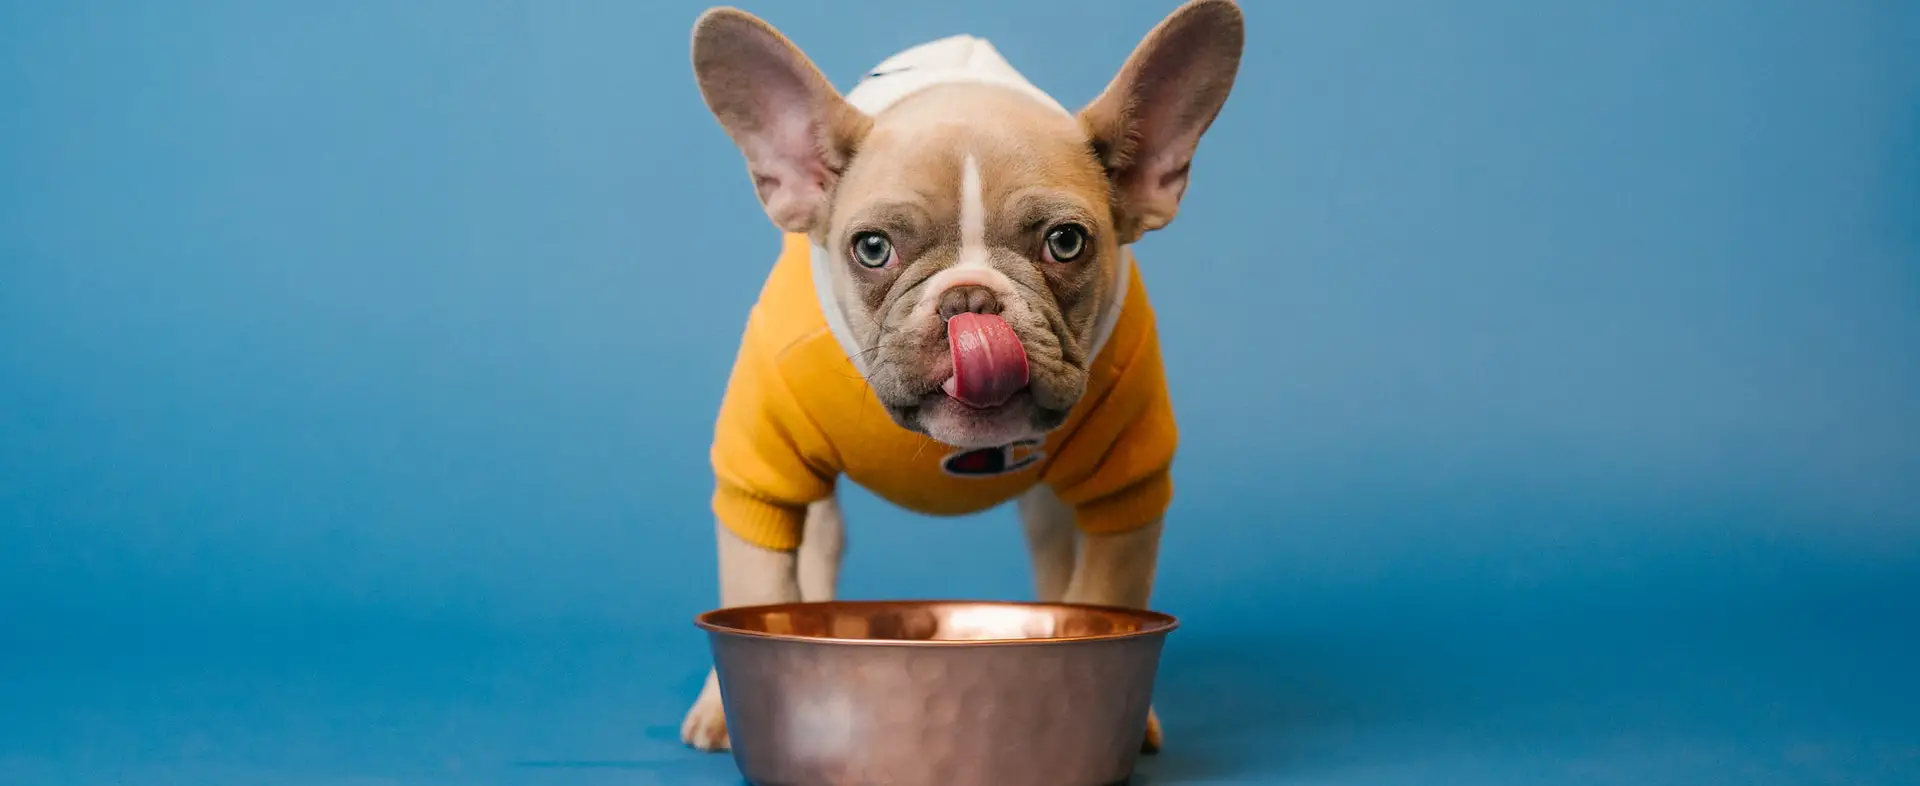 3 Best Dog Treats for French Bulldogs w/ Sensitive Stomach